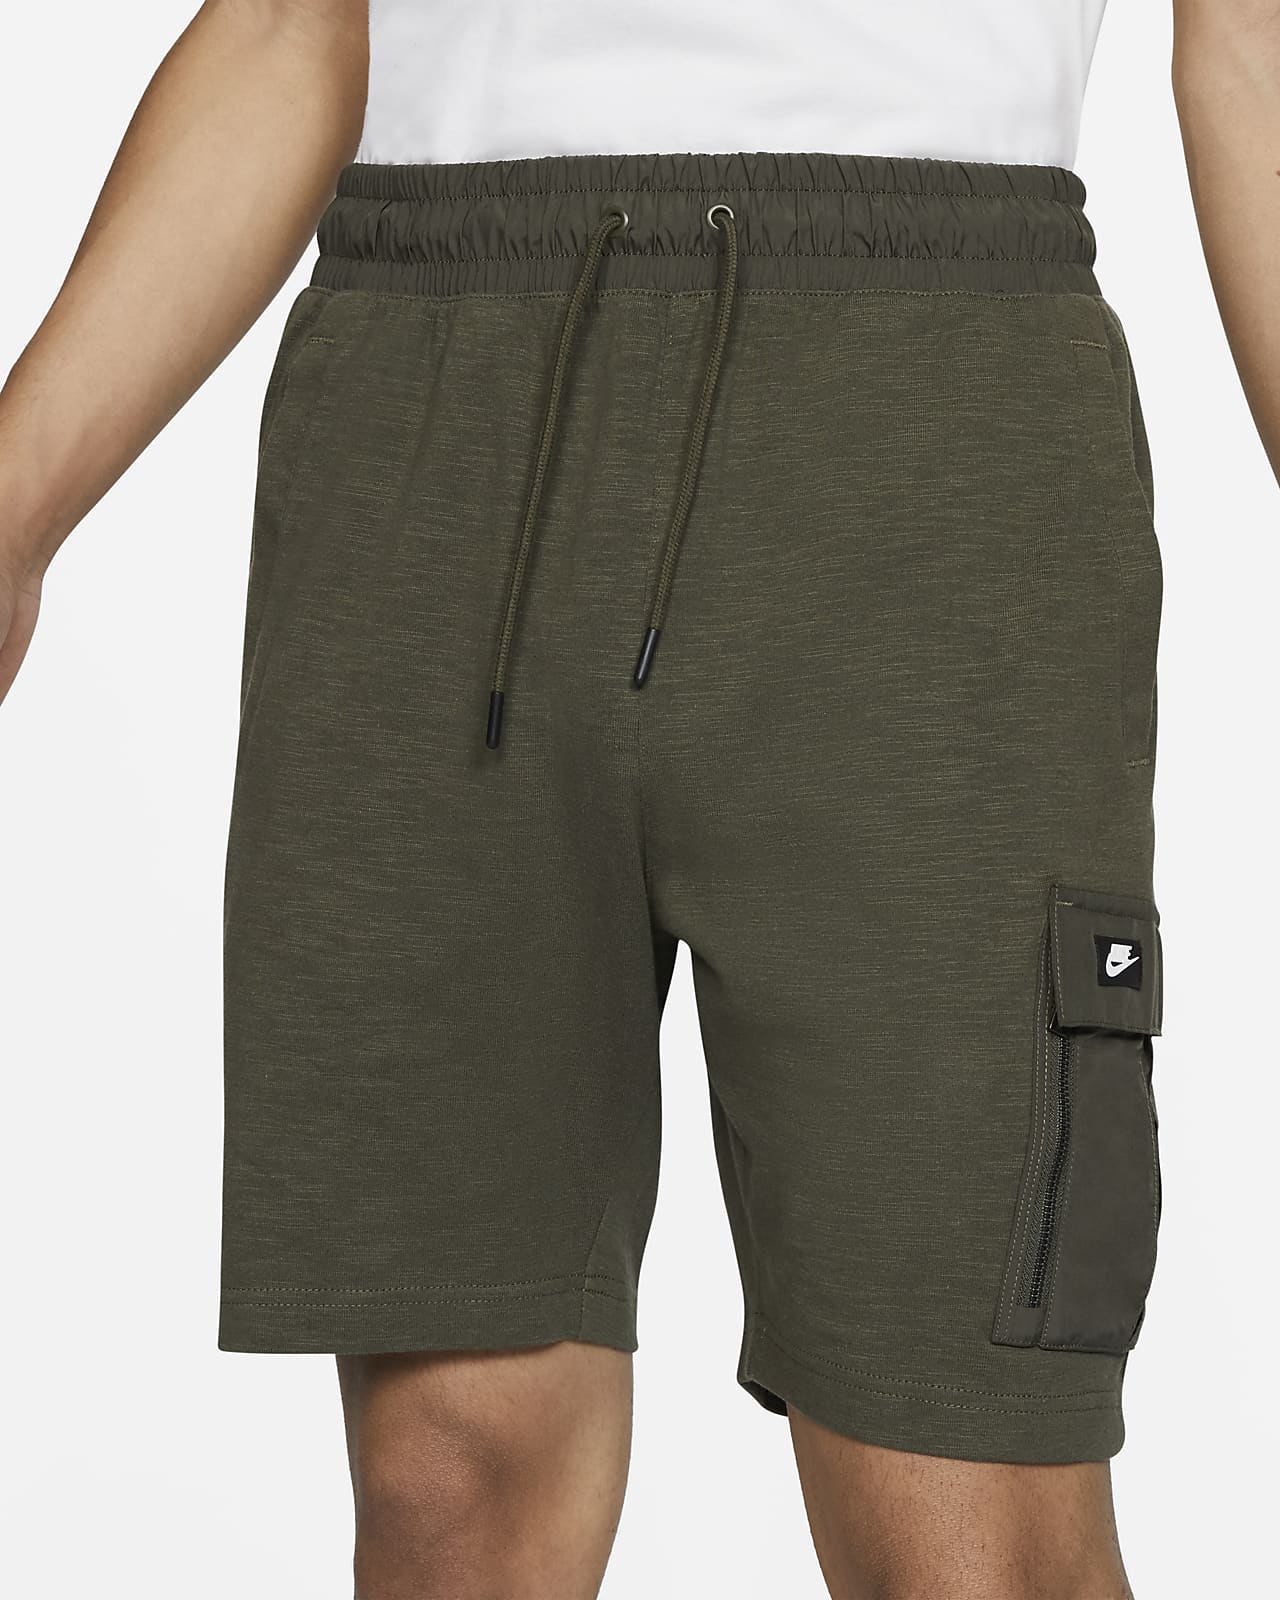 nike shorts above the knee